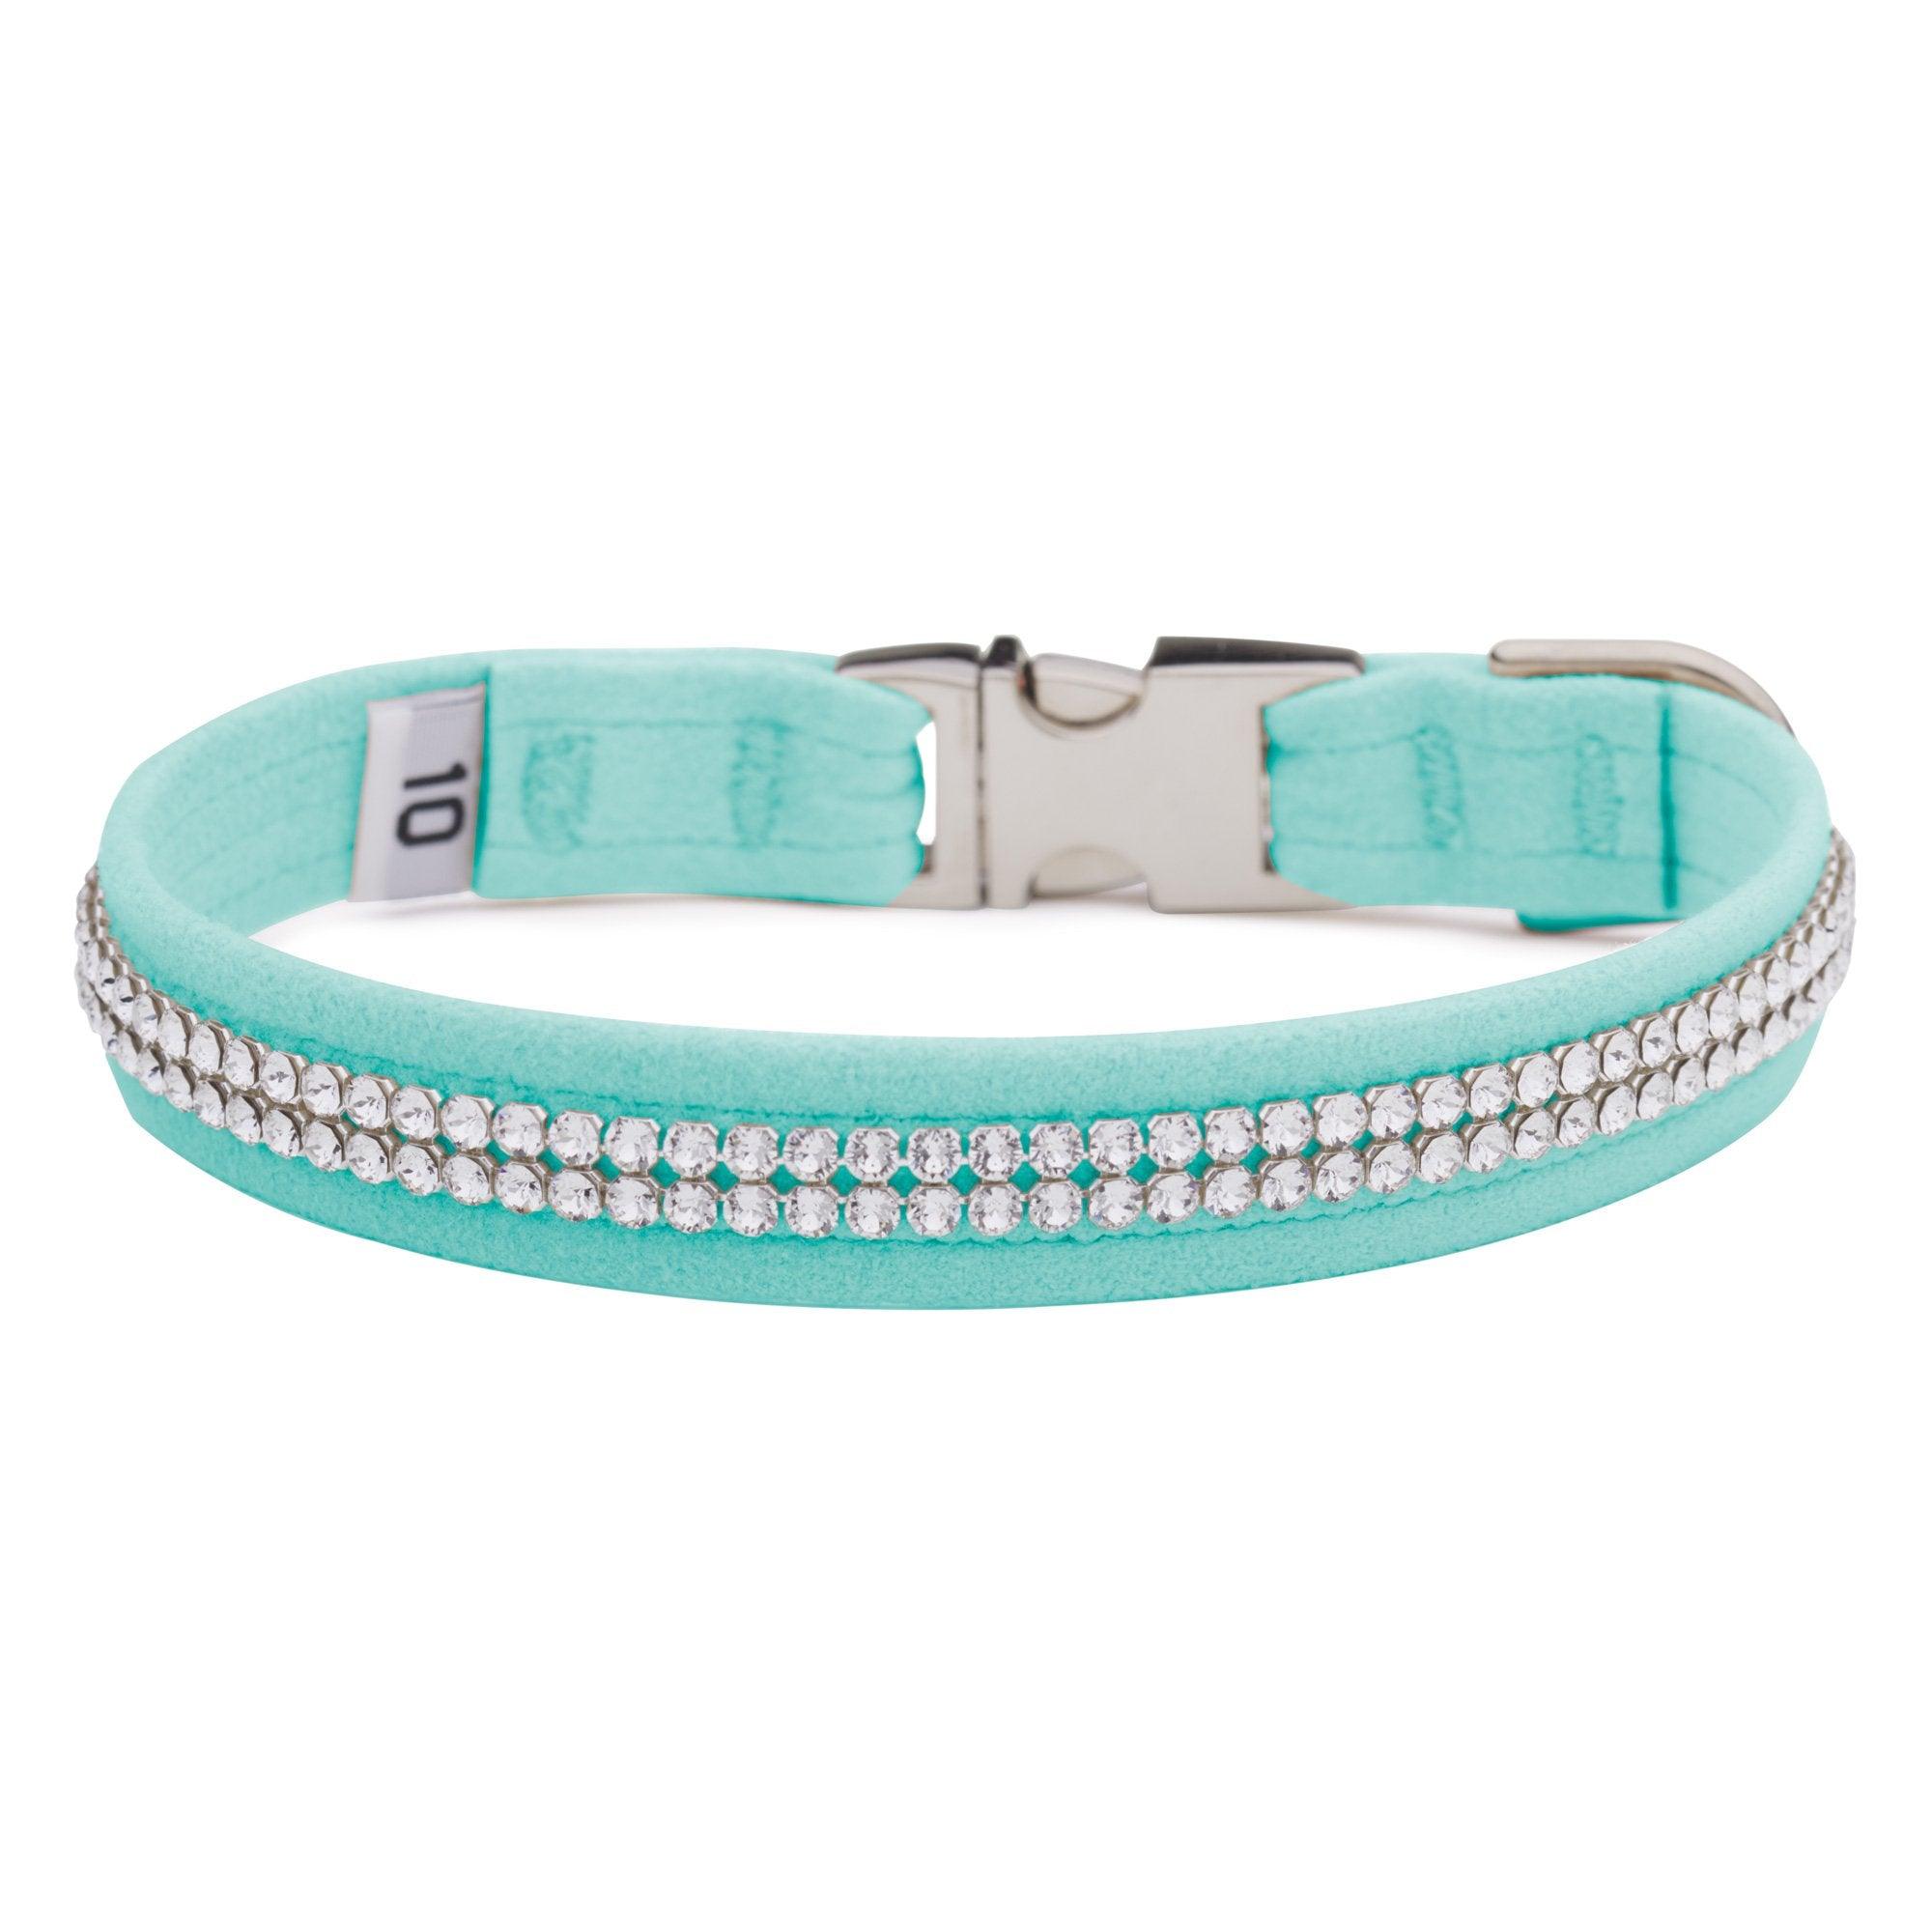 Tiffi Blue 2 Row Giltmore Perfect Fit Collar - Rocky & Maggie's Pet Boutique and Salon